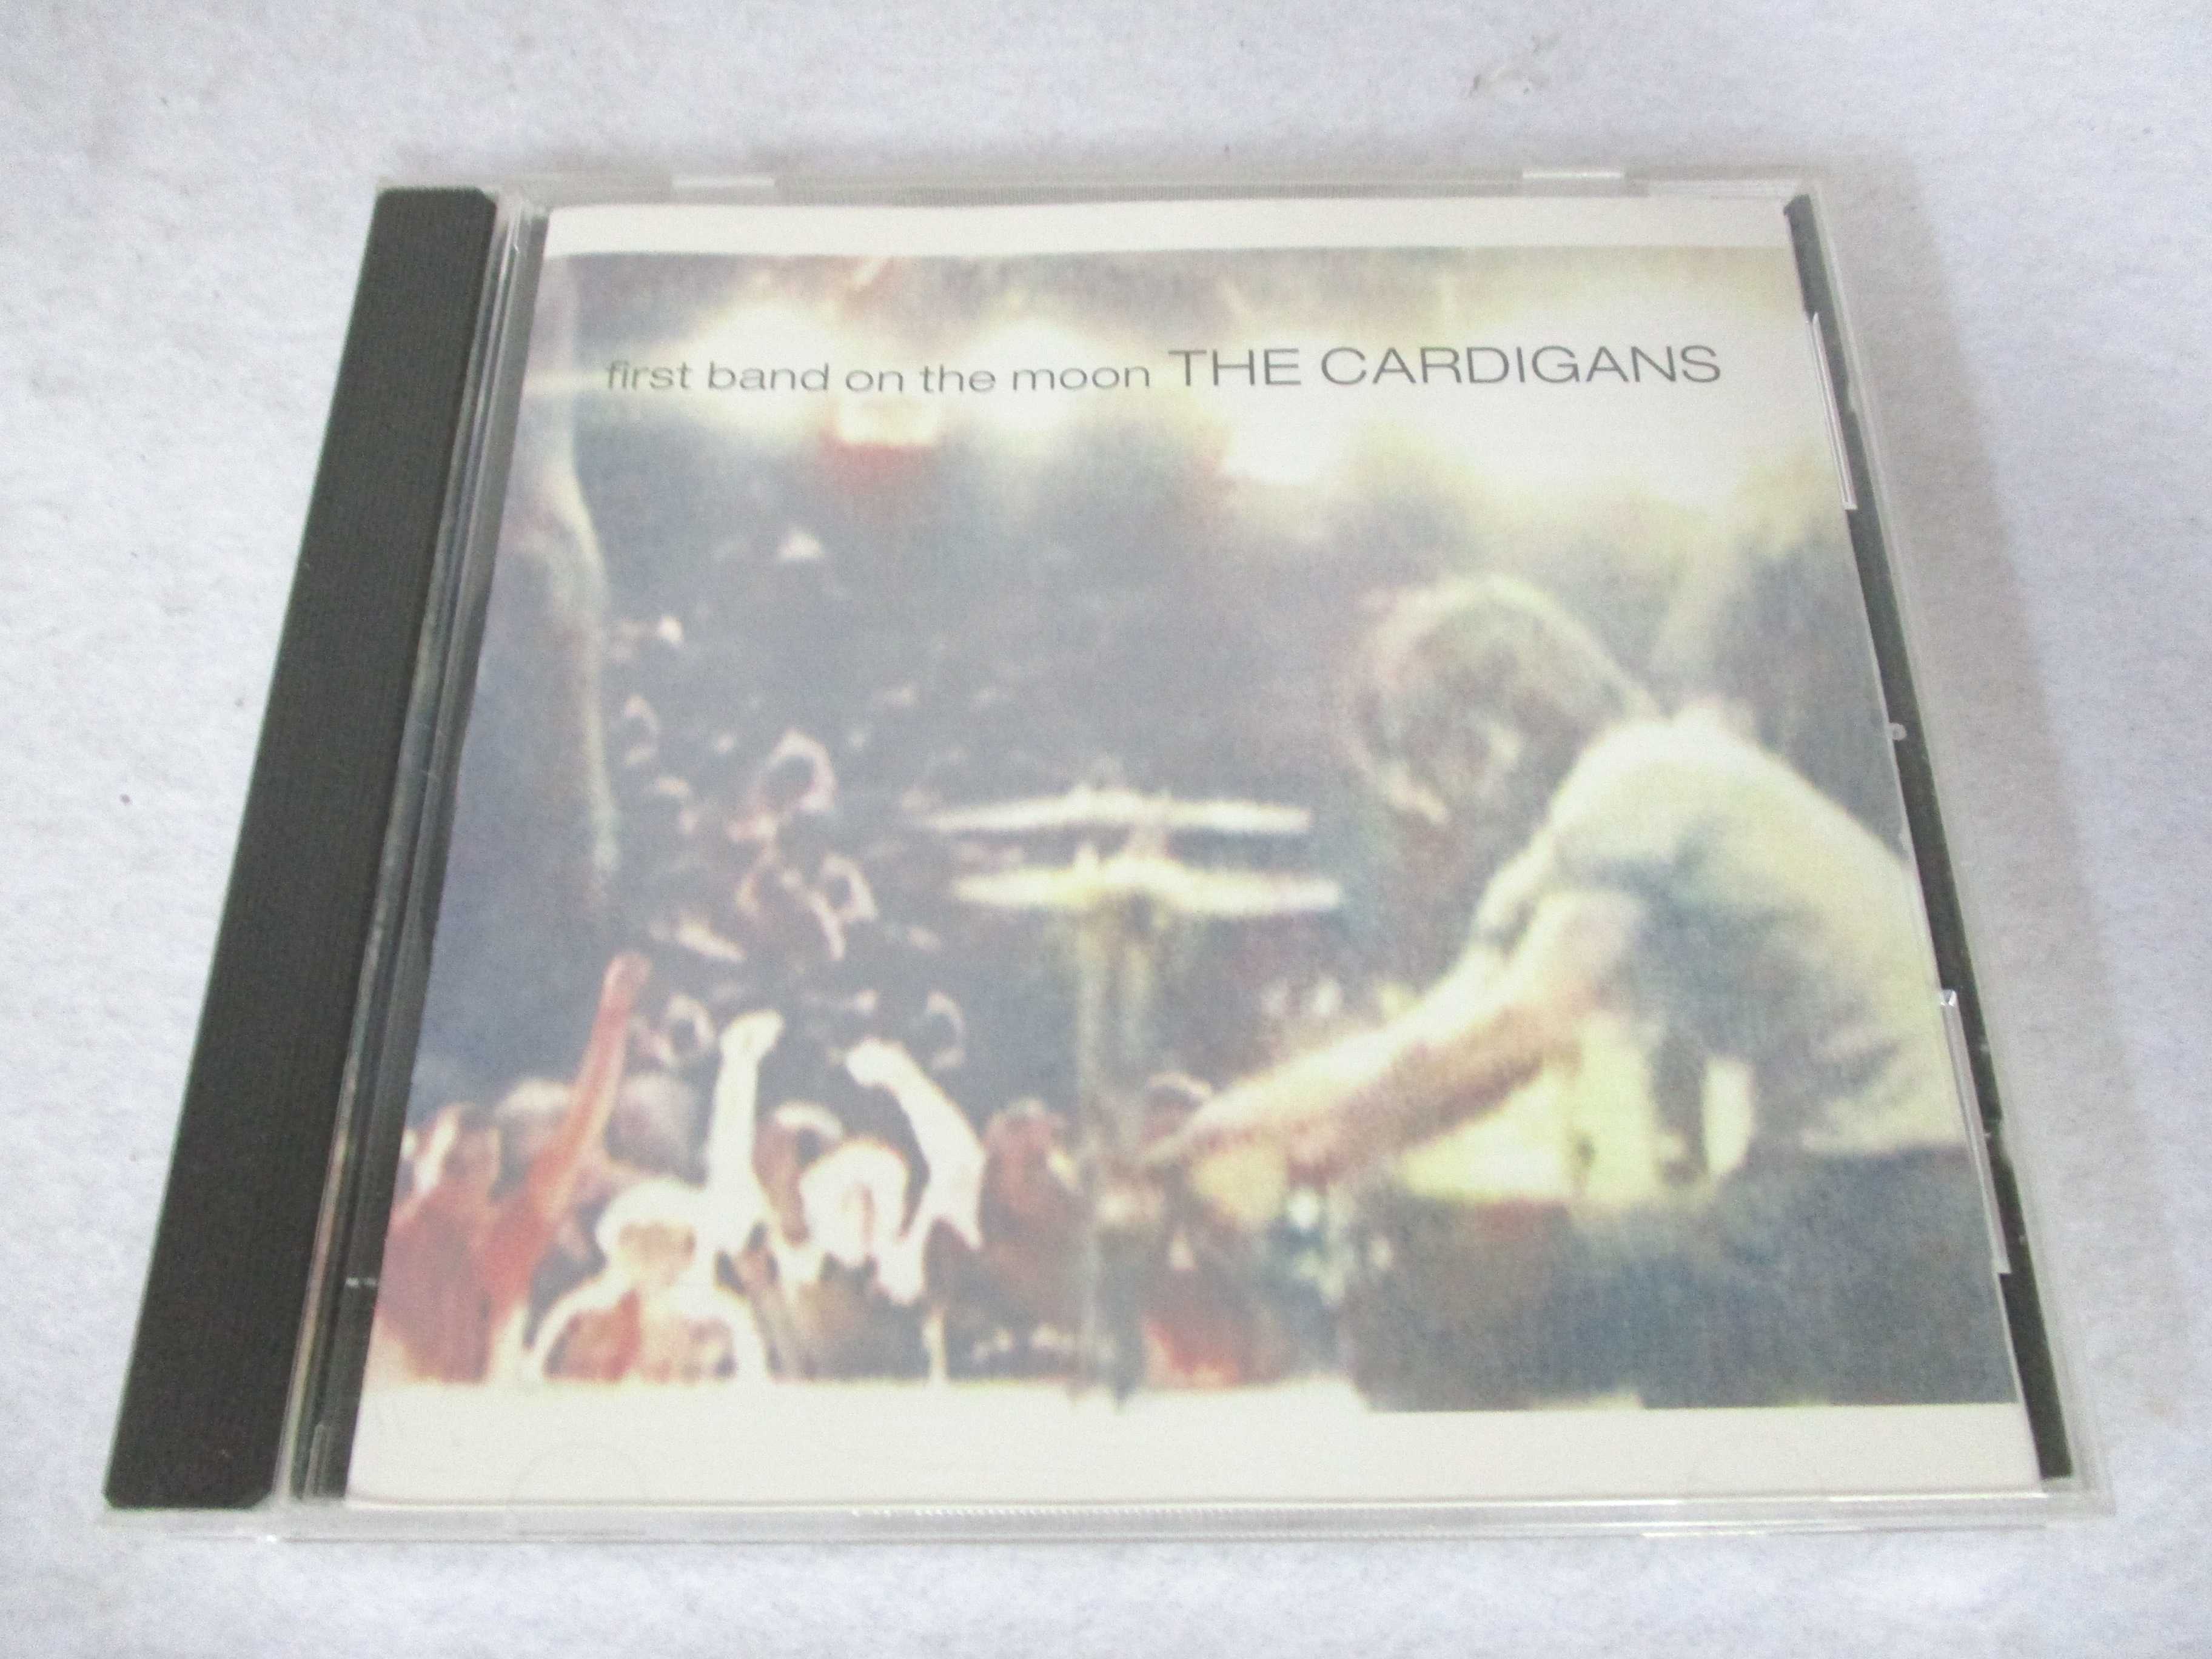 AC01397 yÁz yCDz first band on the moon/THE CARDIGANS